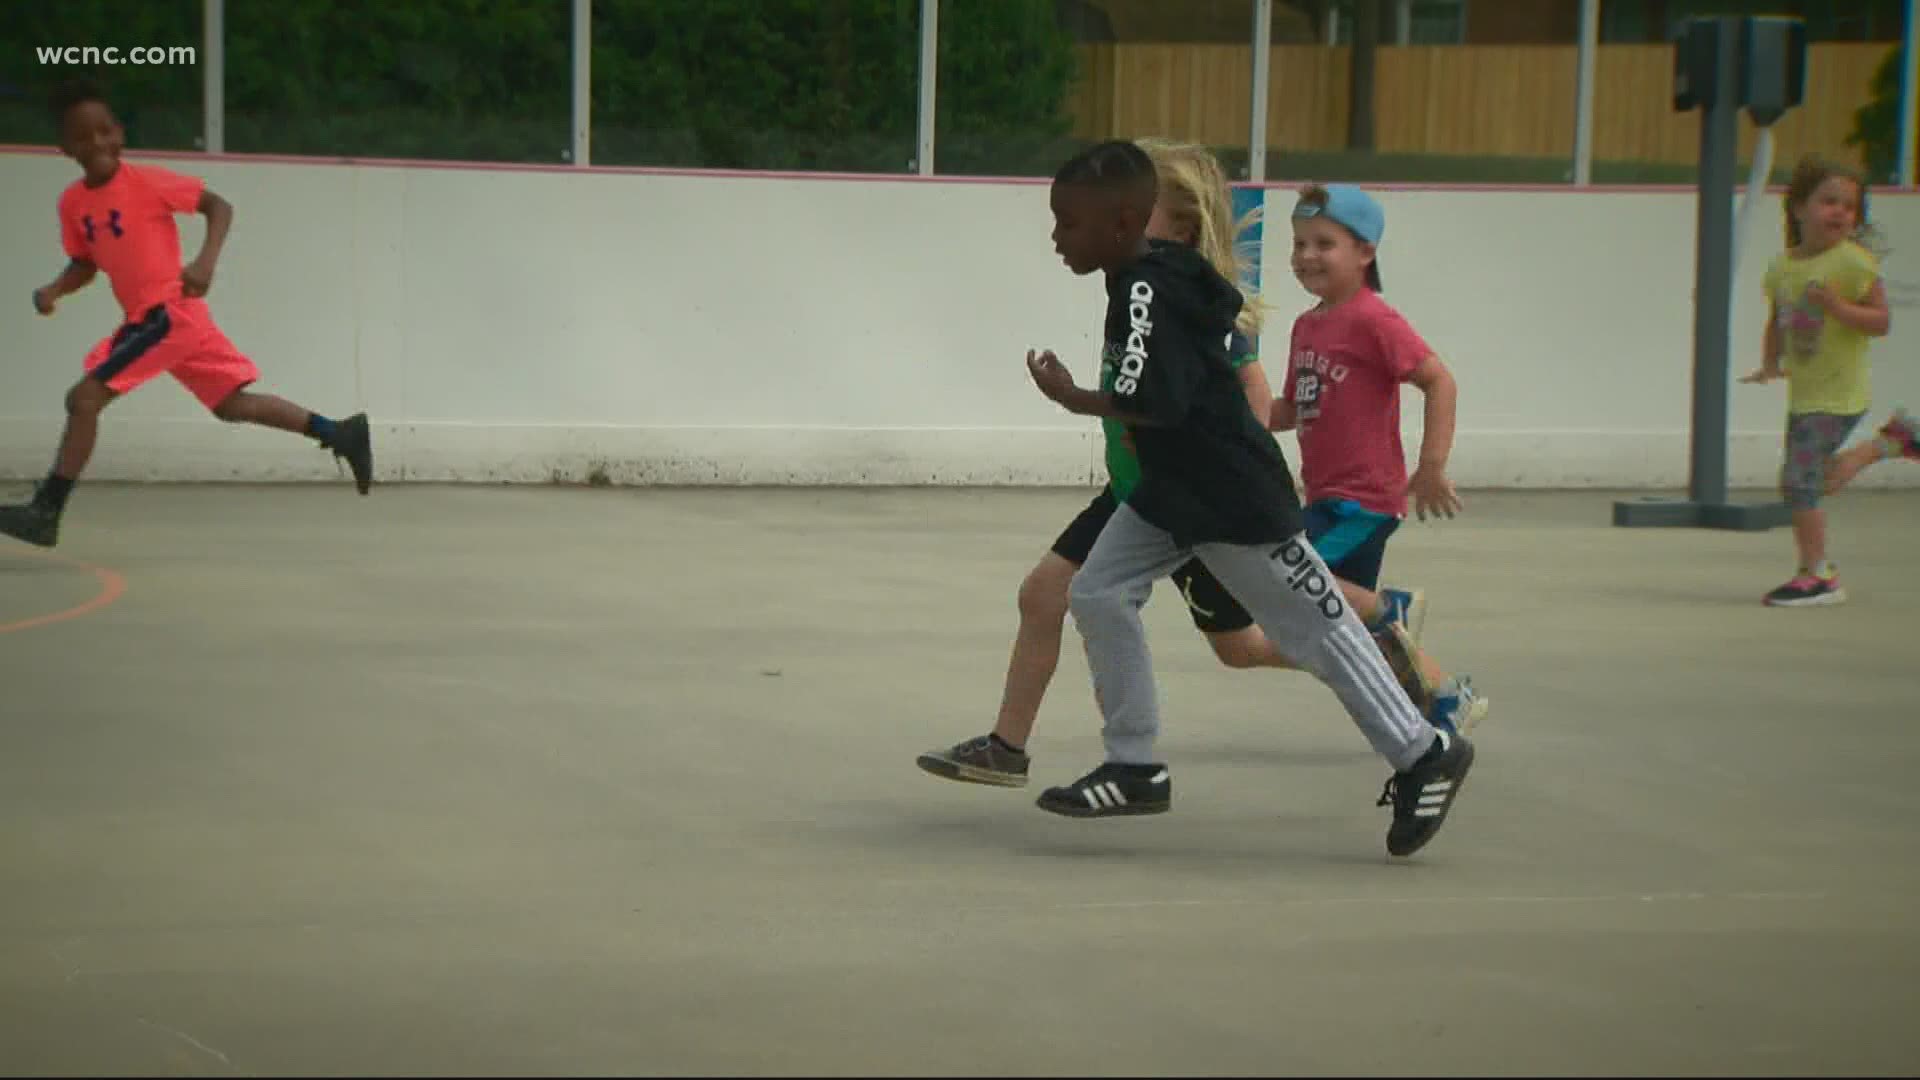 We take a look at how several summer camps plan to keep children safe this year.